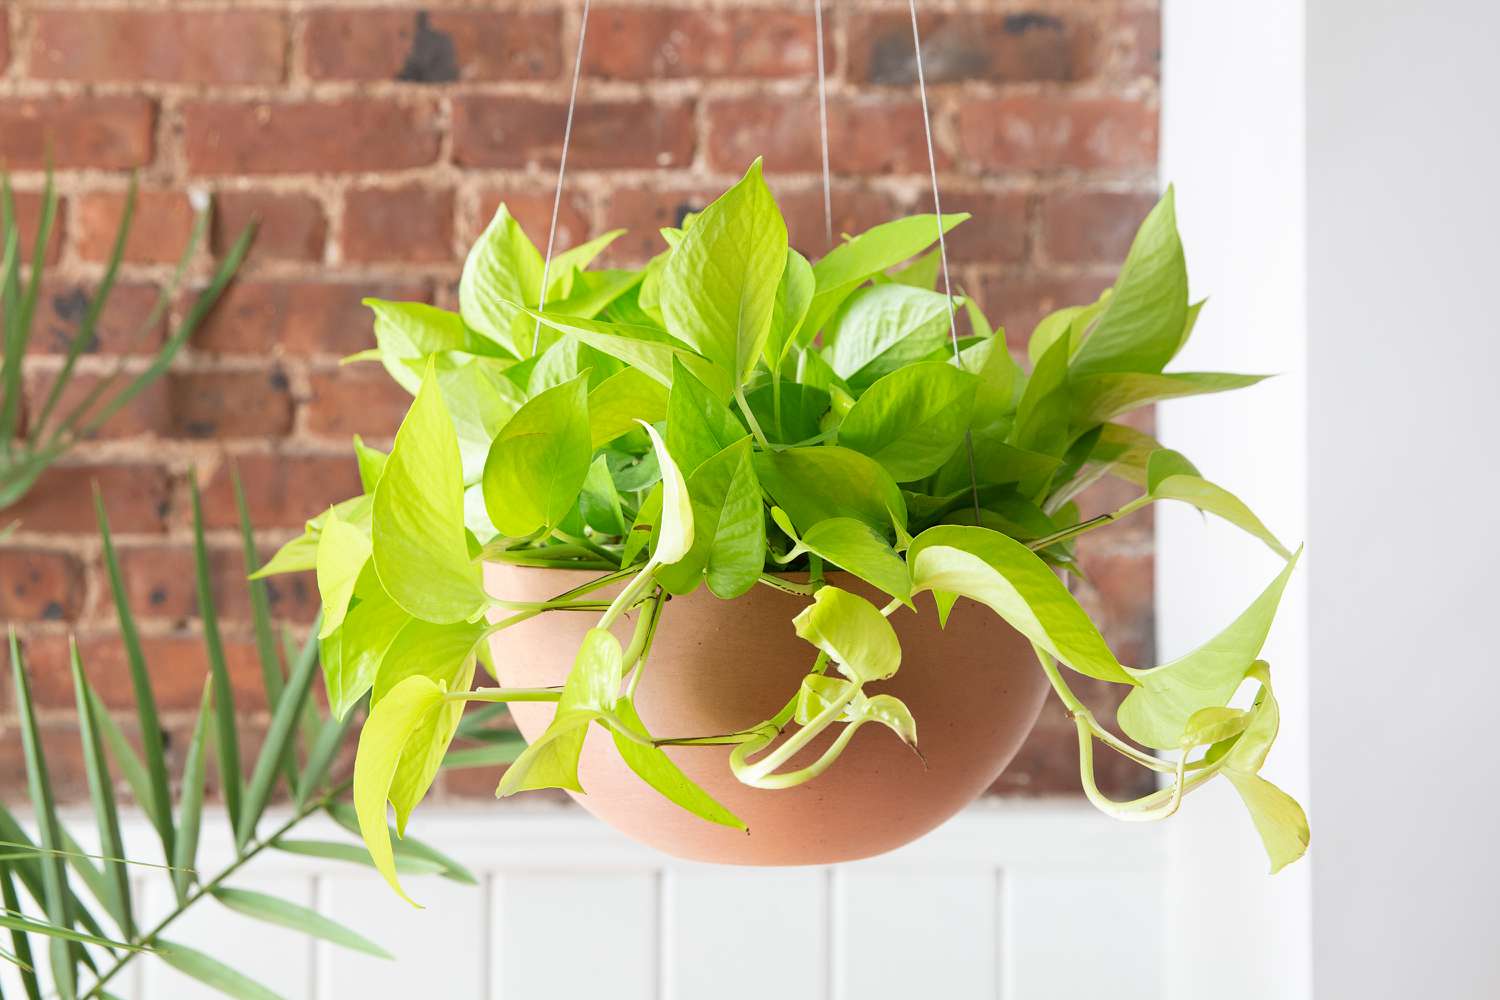 Neon pothos hanging from a planter